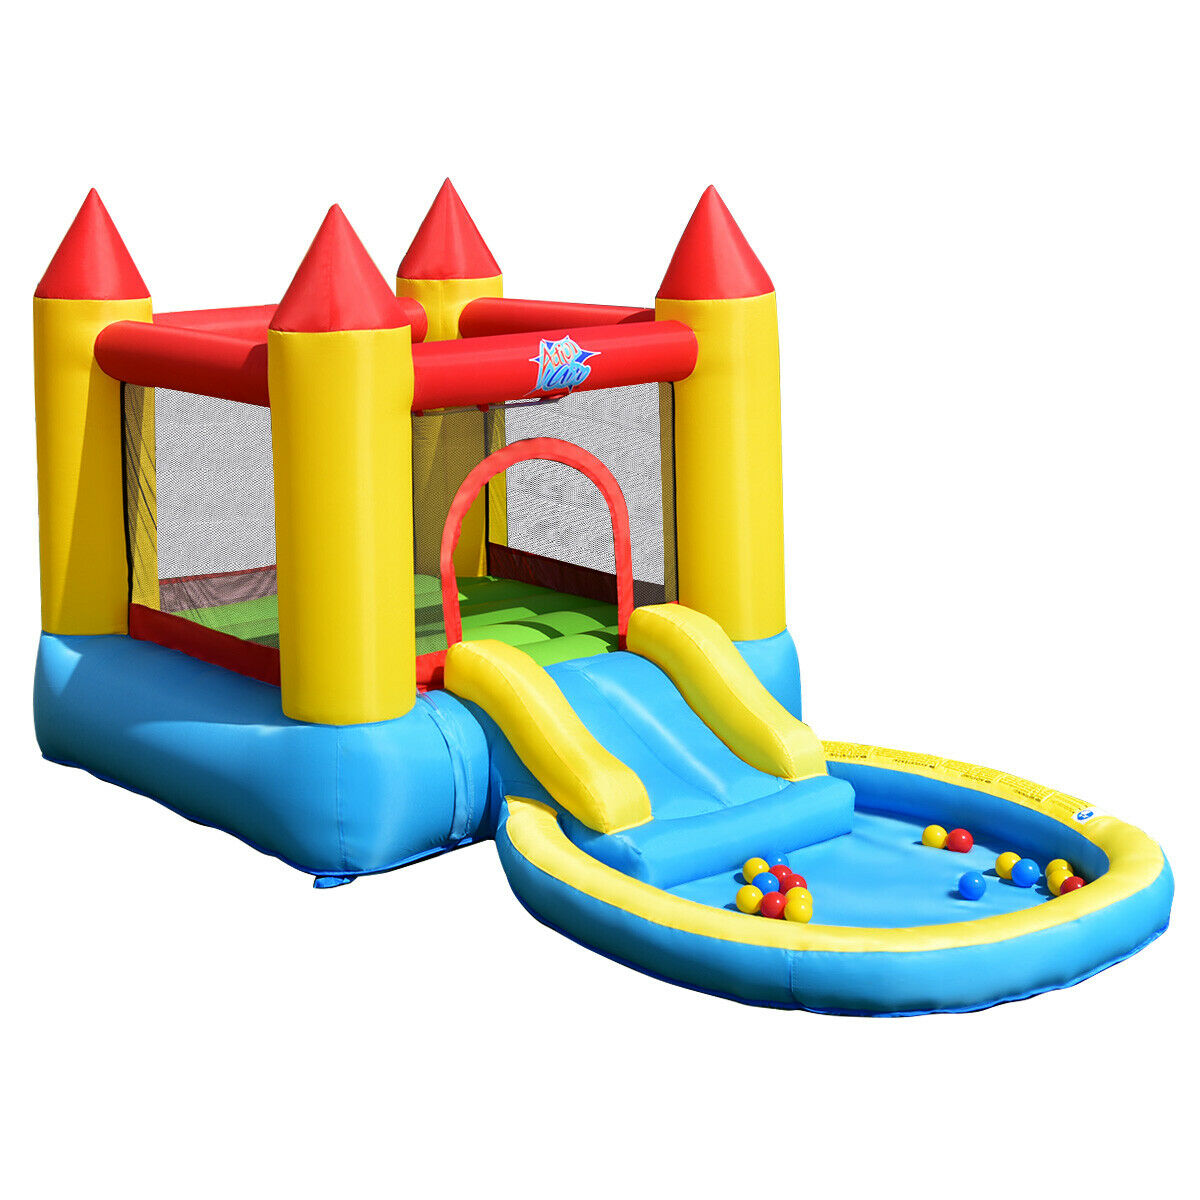 Gymax Inflatable Bounce House Kids Slide Jumping Castle Bouncer w/Pool and 480W Blower - image 3 of 10